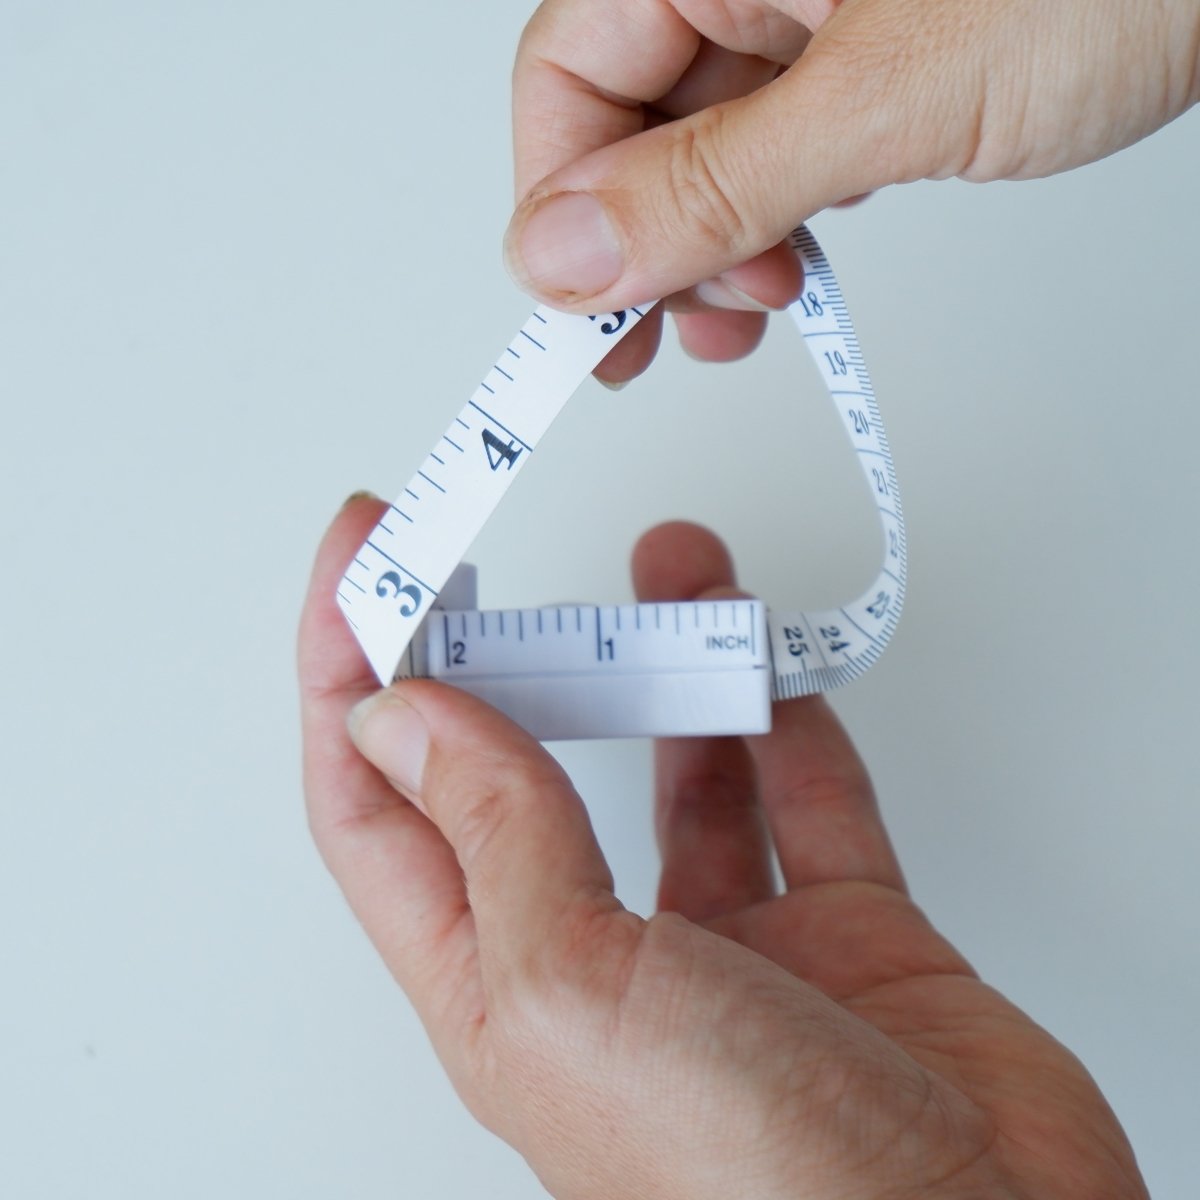 Check body measurements with measuring tape